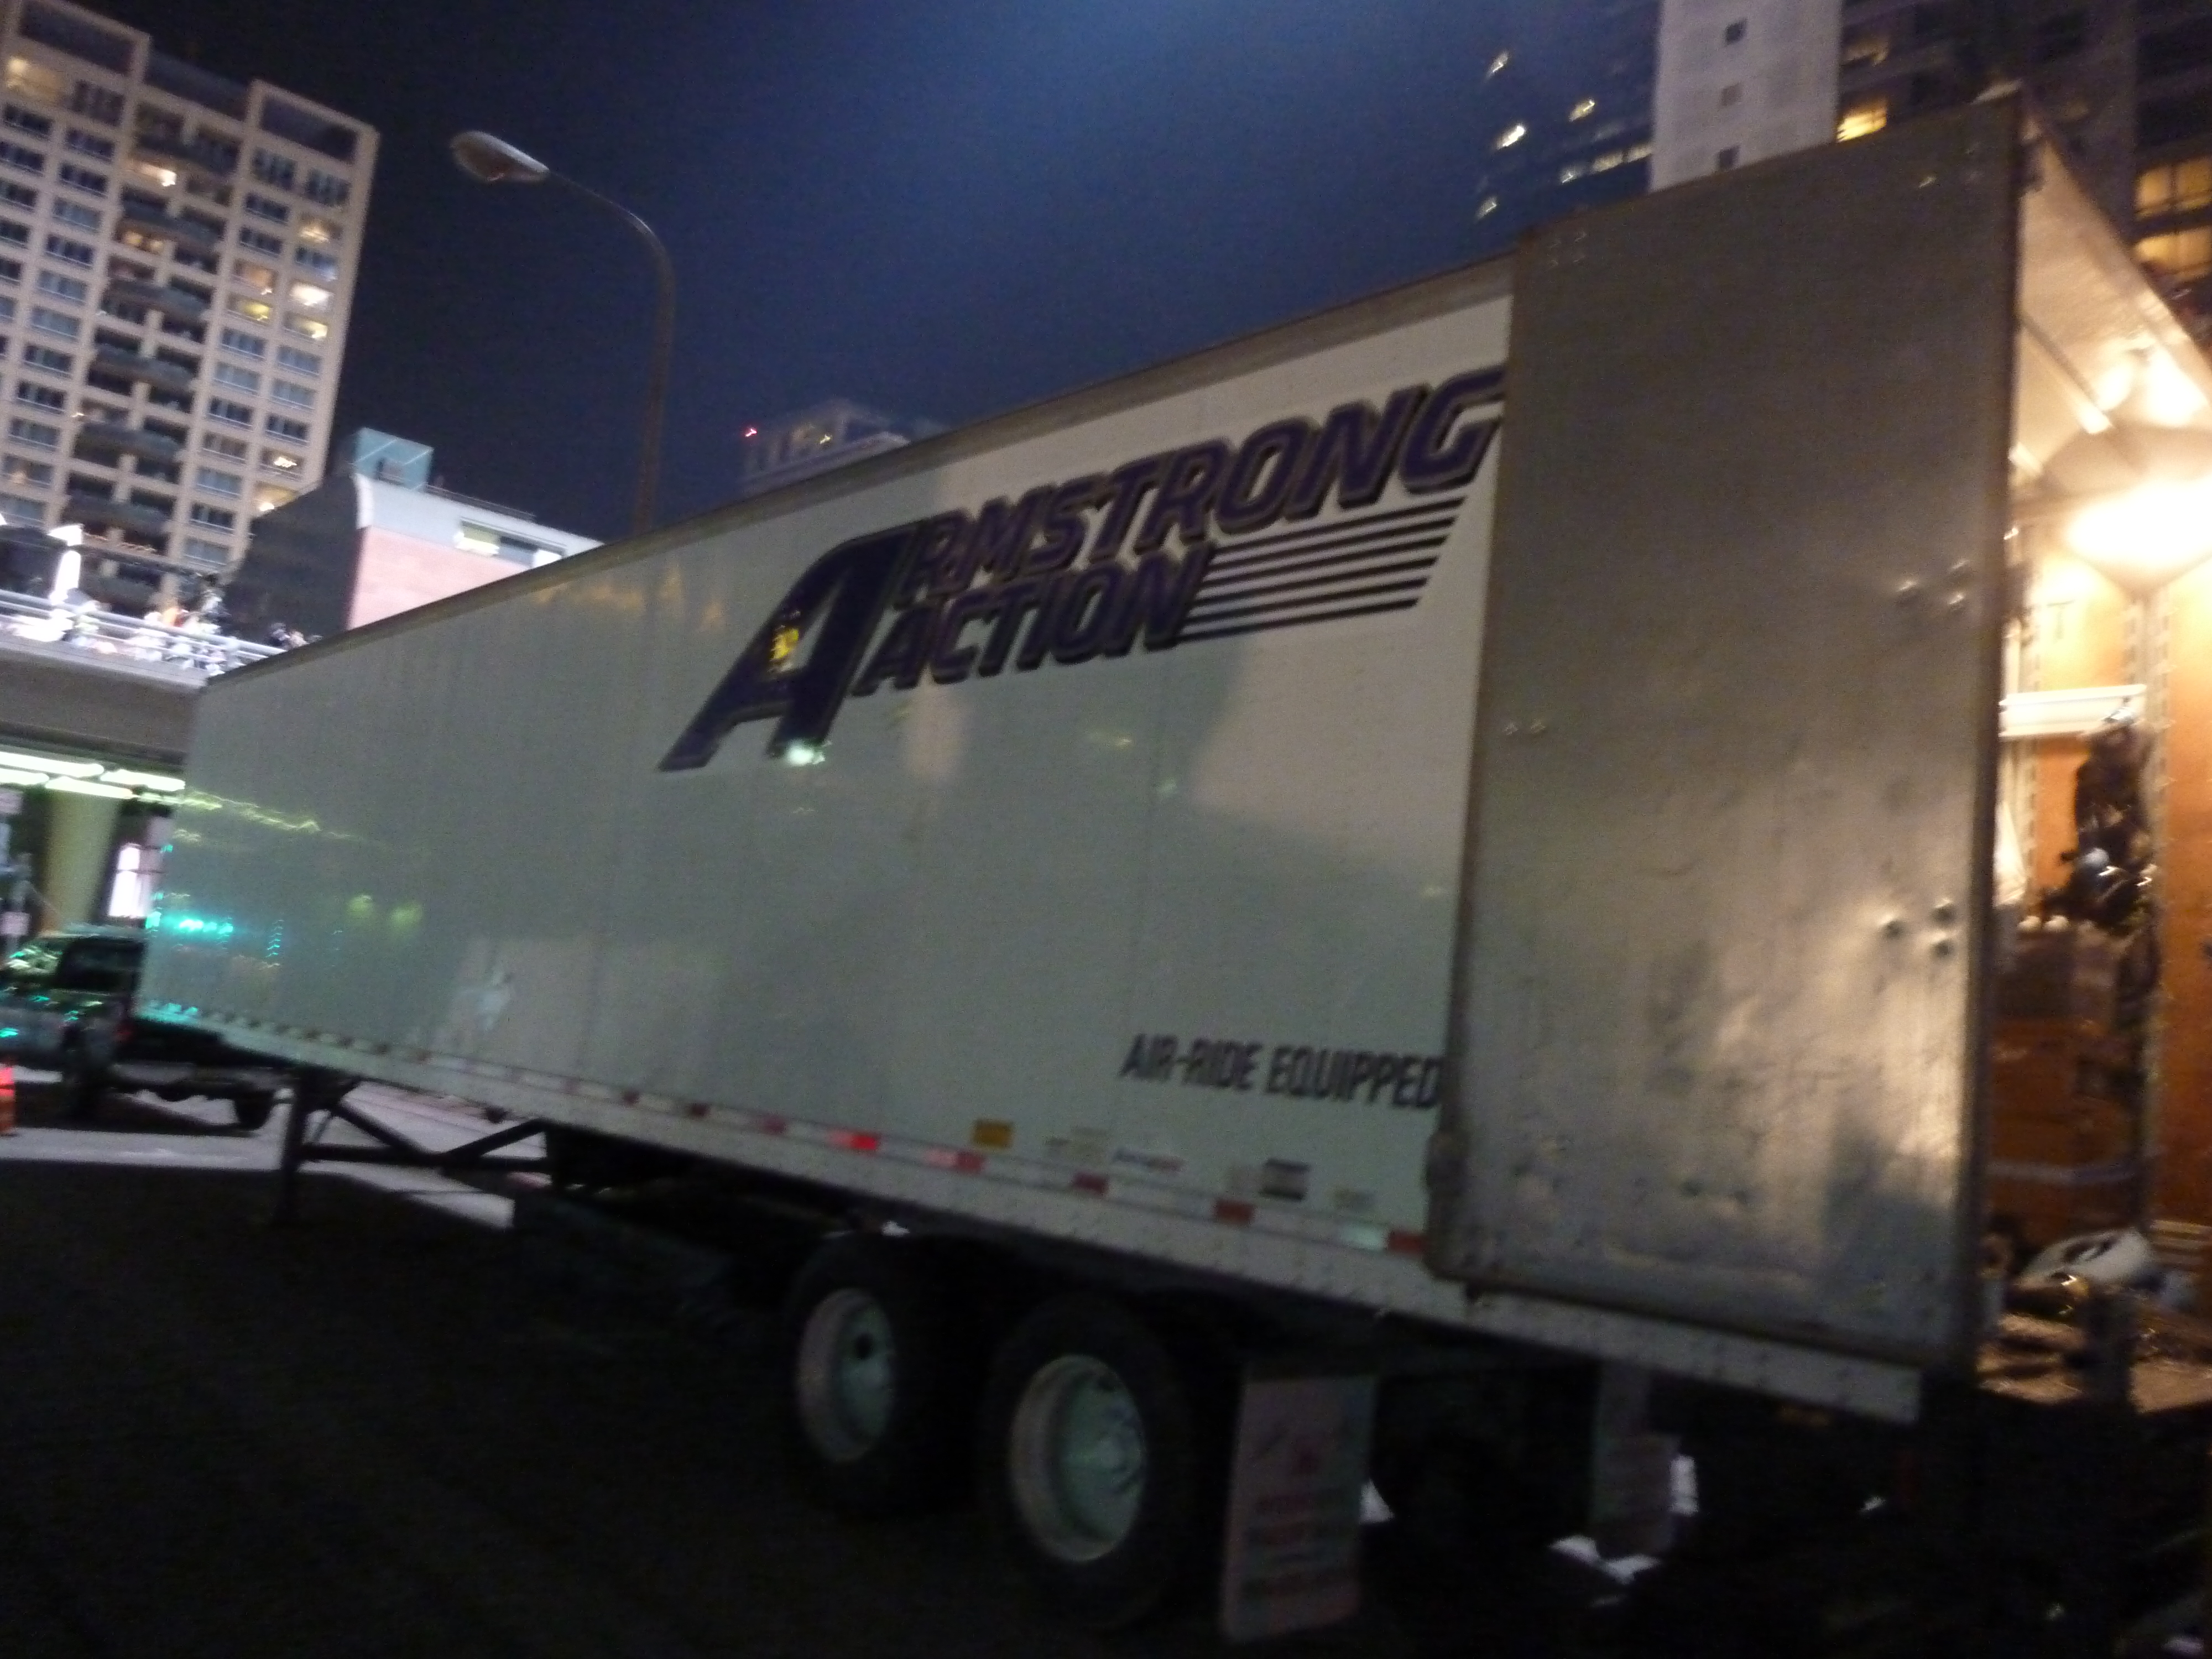 Armstrong Action 48 Foot Trailer #1 on Nightshoot Location in Hollywood on 